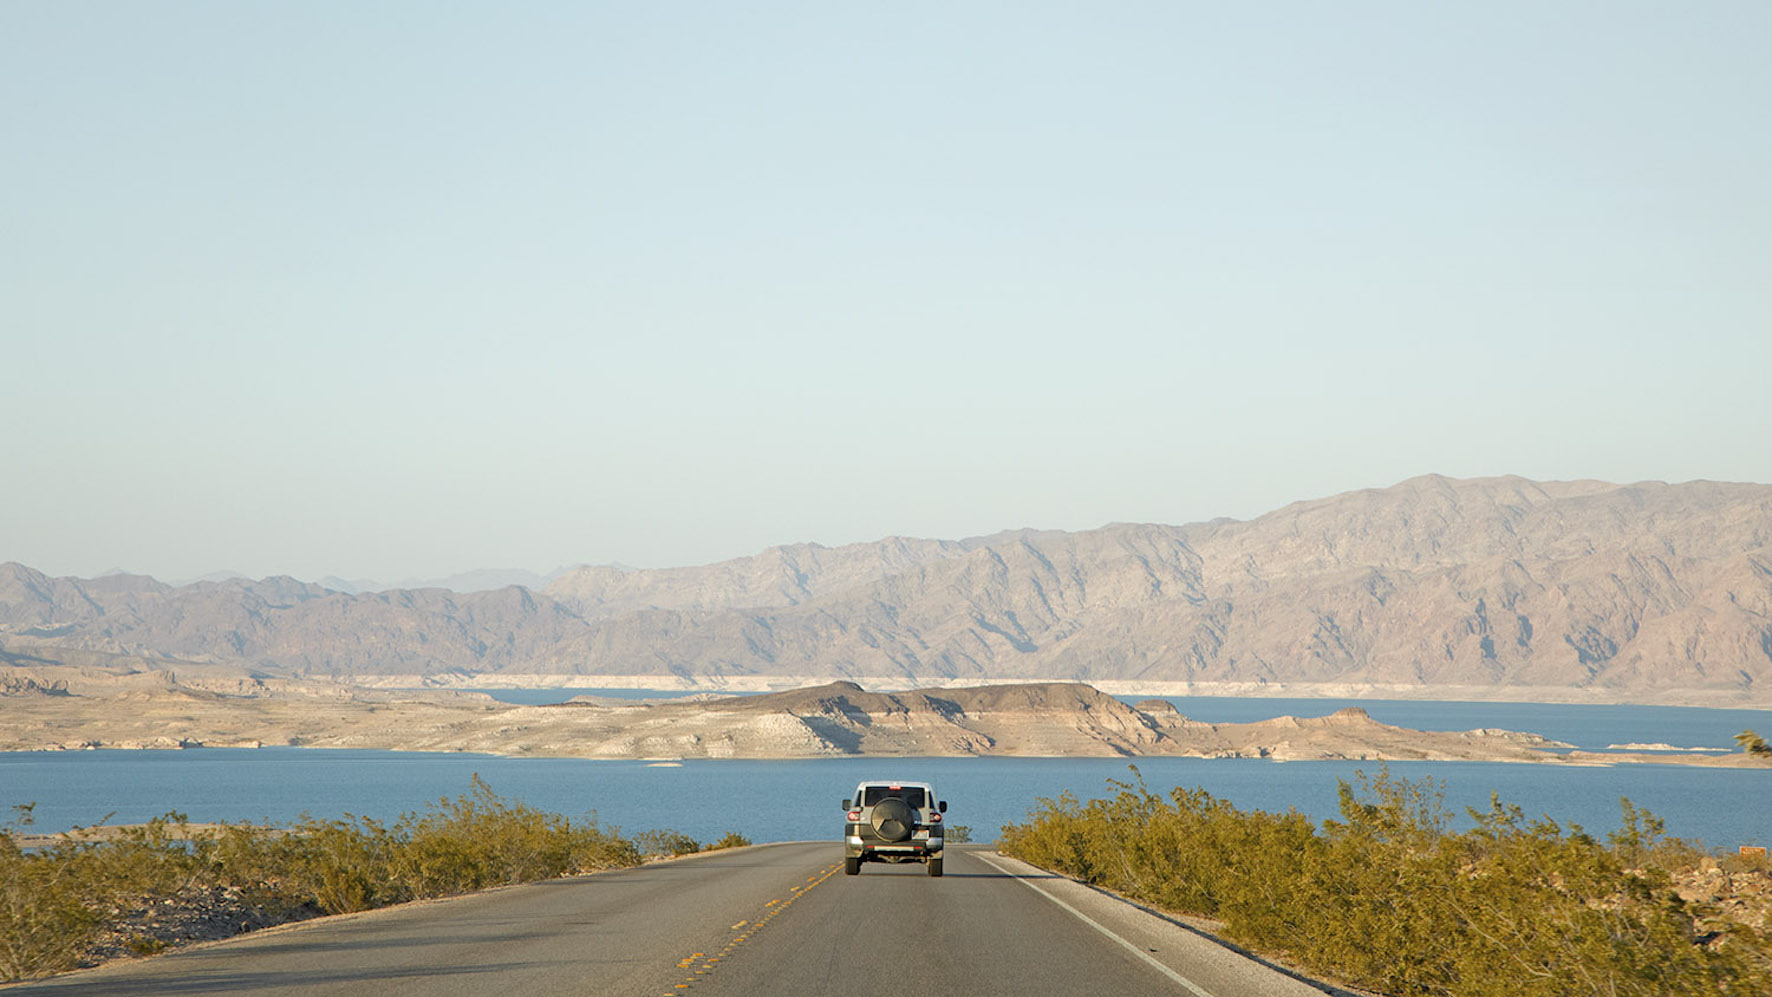  Embark on an unforgettable road trip along Nevada’s stunning Great Basin Highway

 